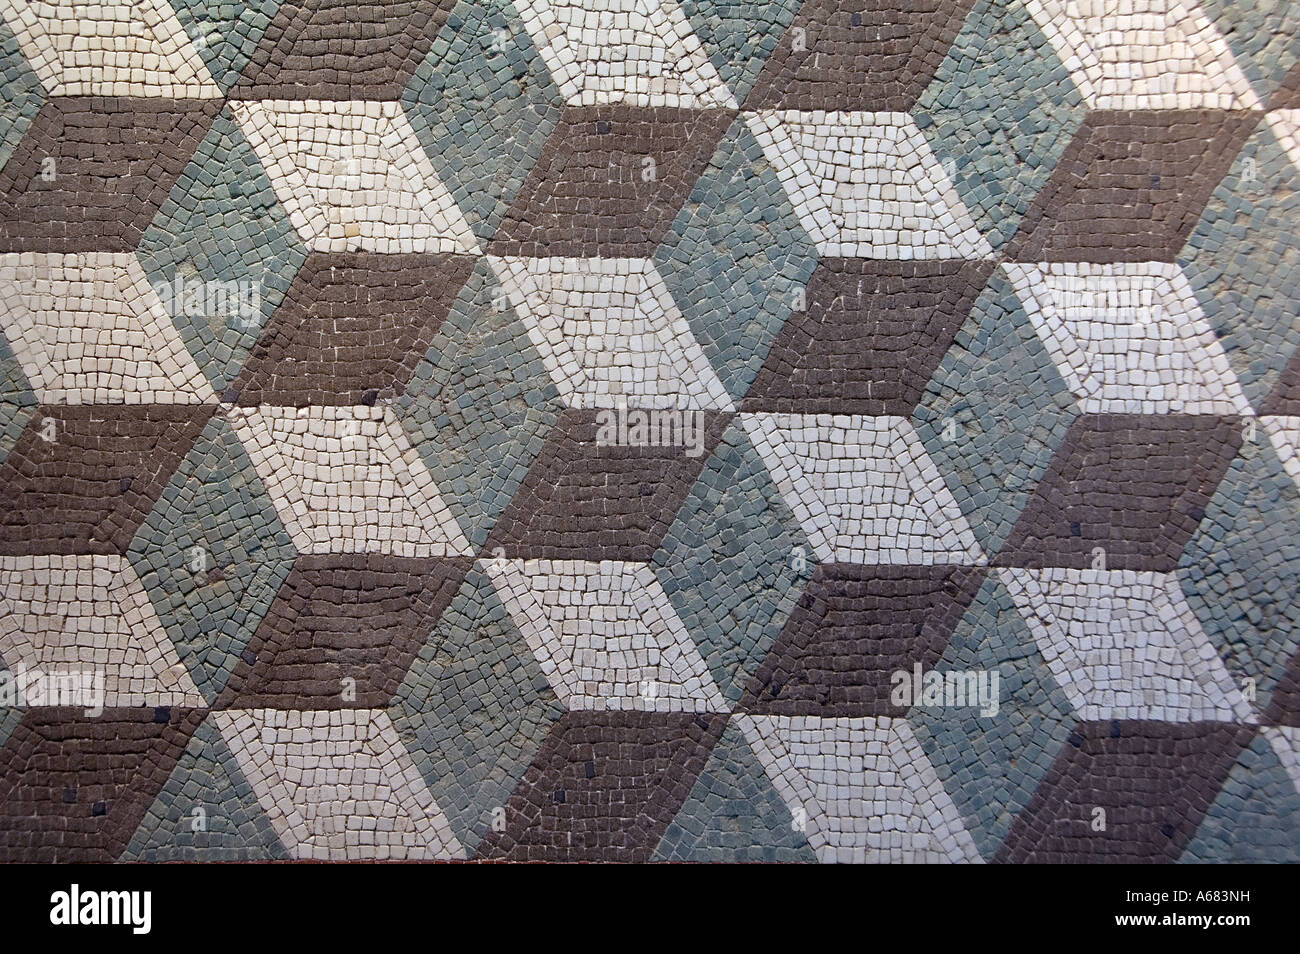 Ancient geometric roman mosaic displayed at Museo Nazionale Romano museum ( Palazzo Massimo Alle Terme ) in Rome Italy Stock Photo